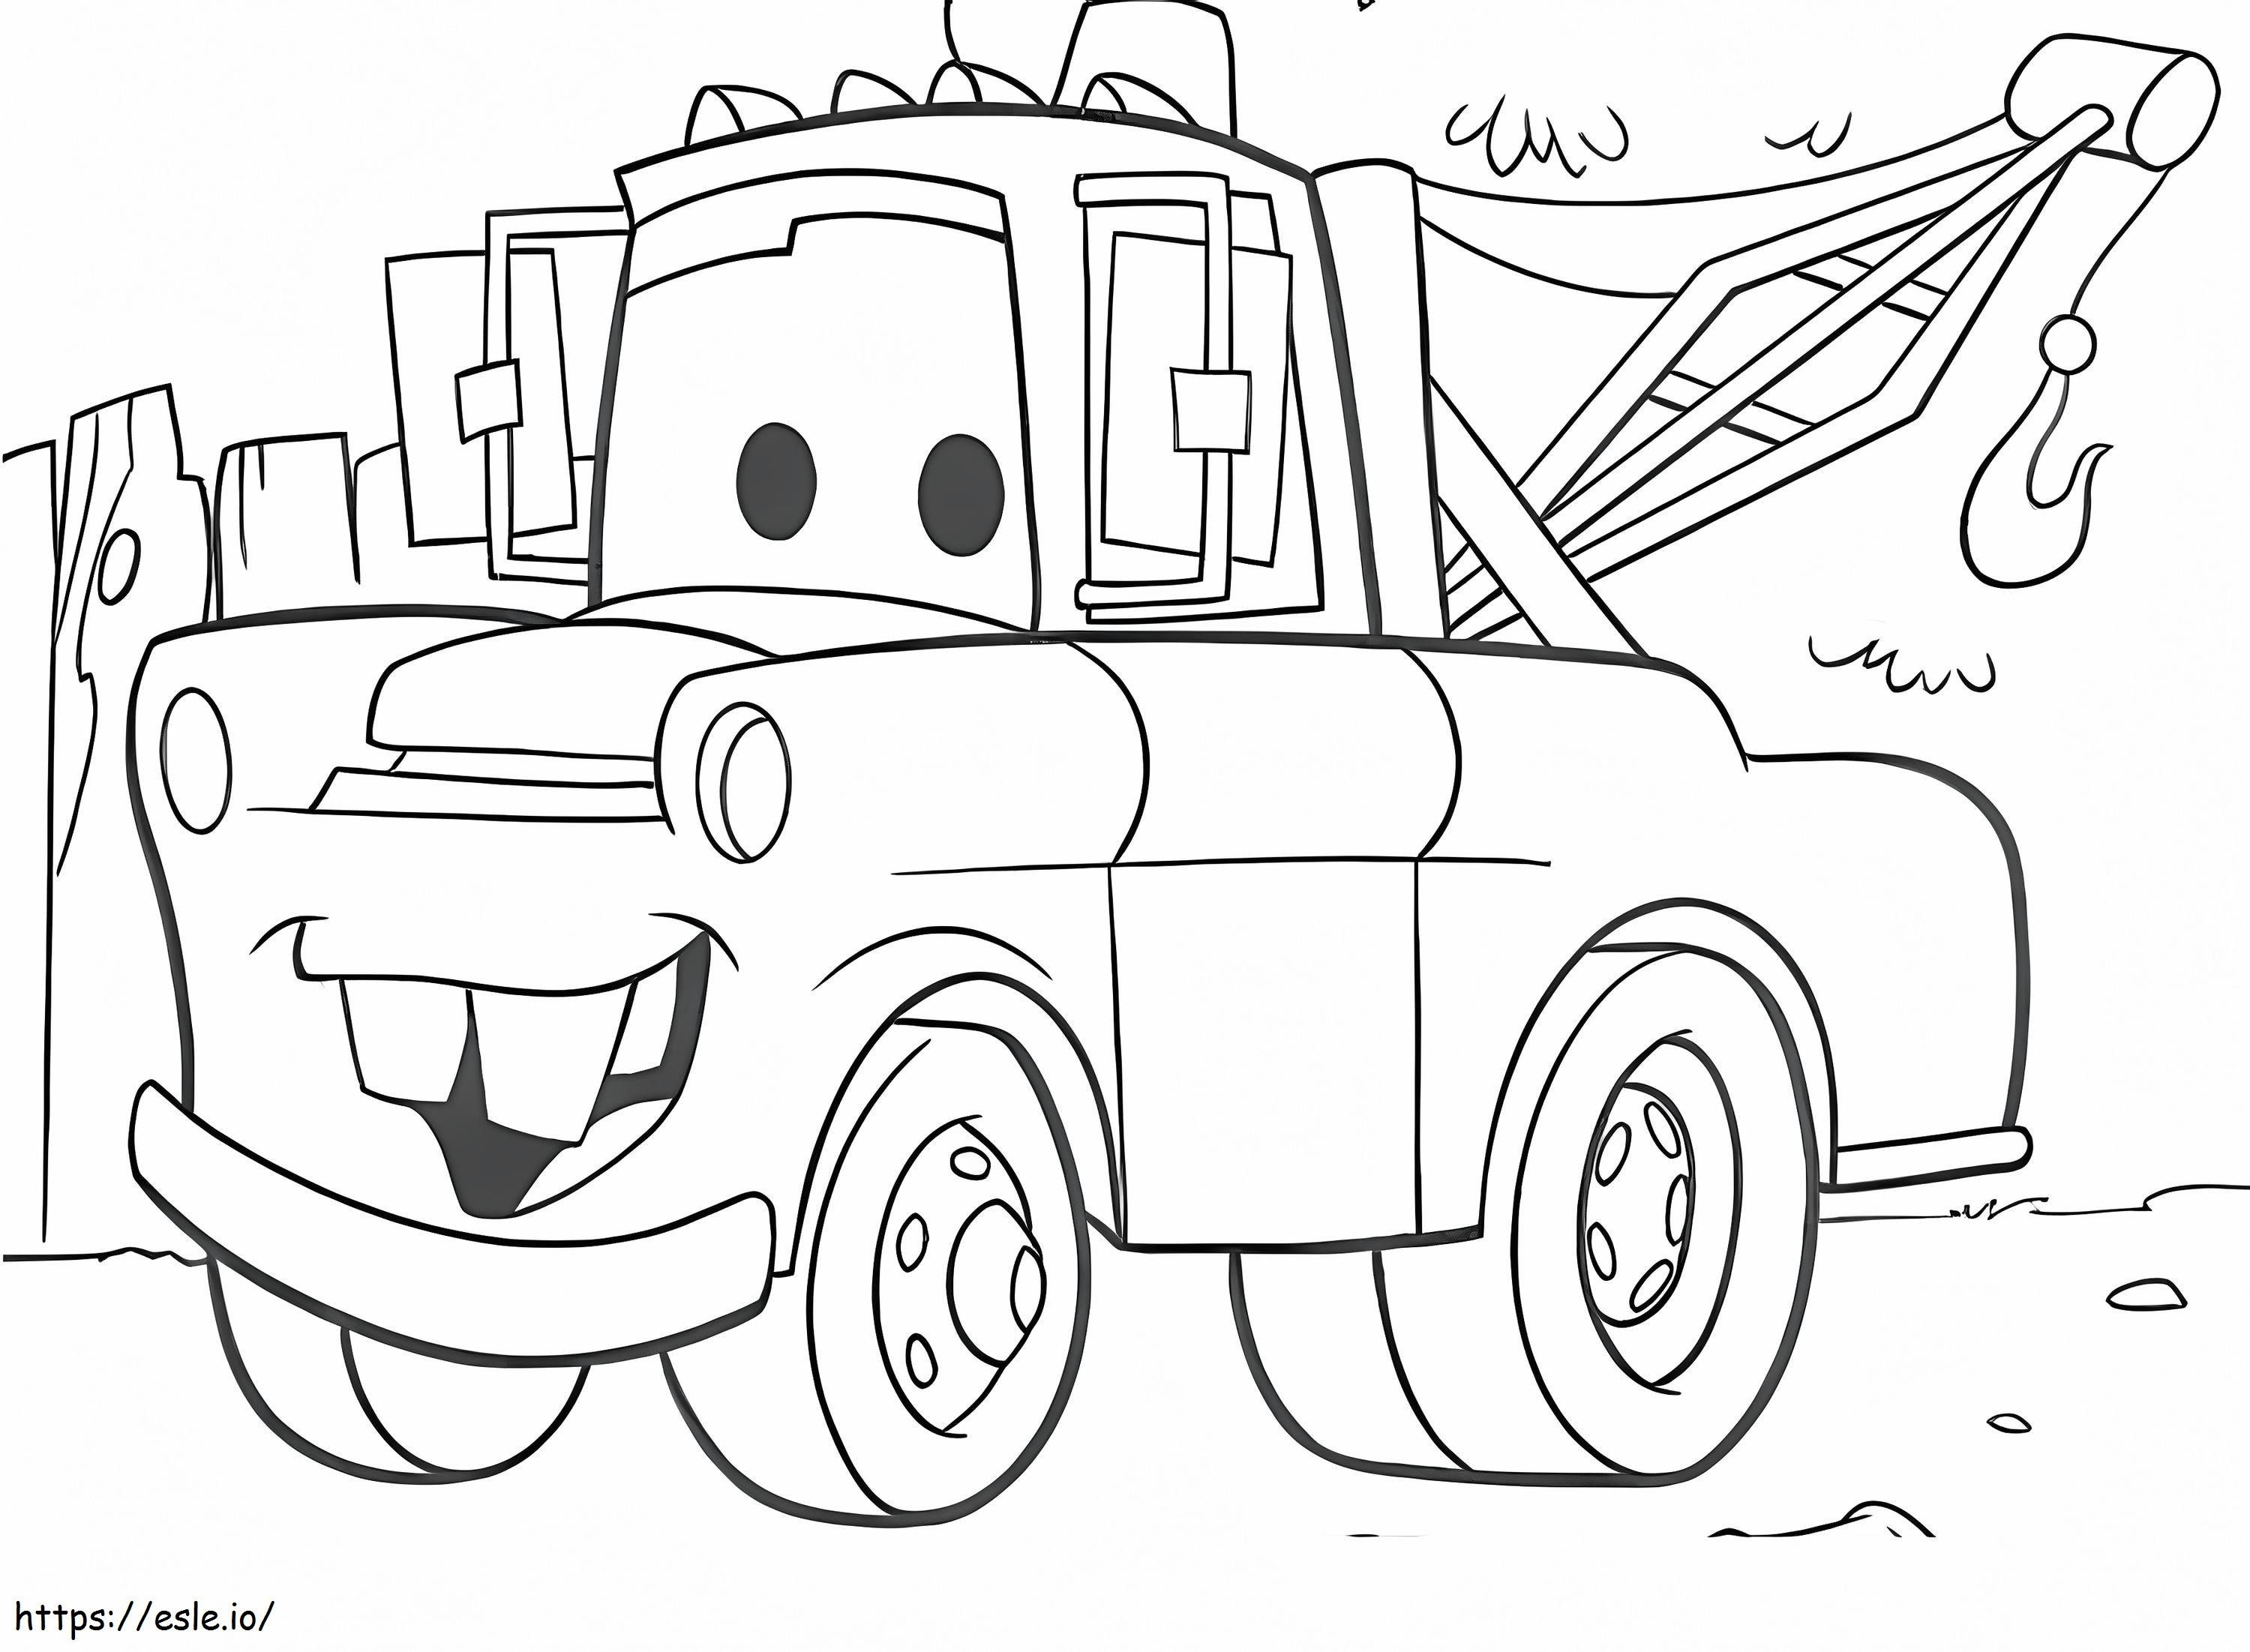 Disney Mater coloring page